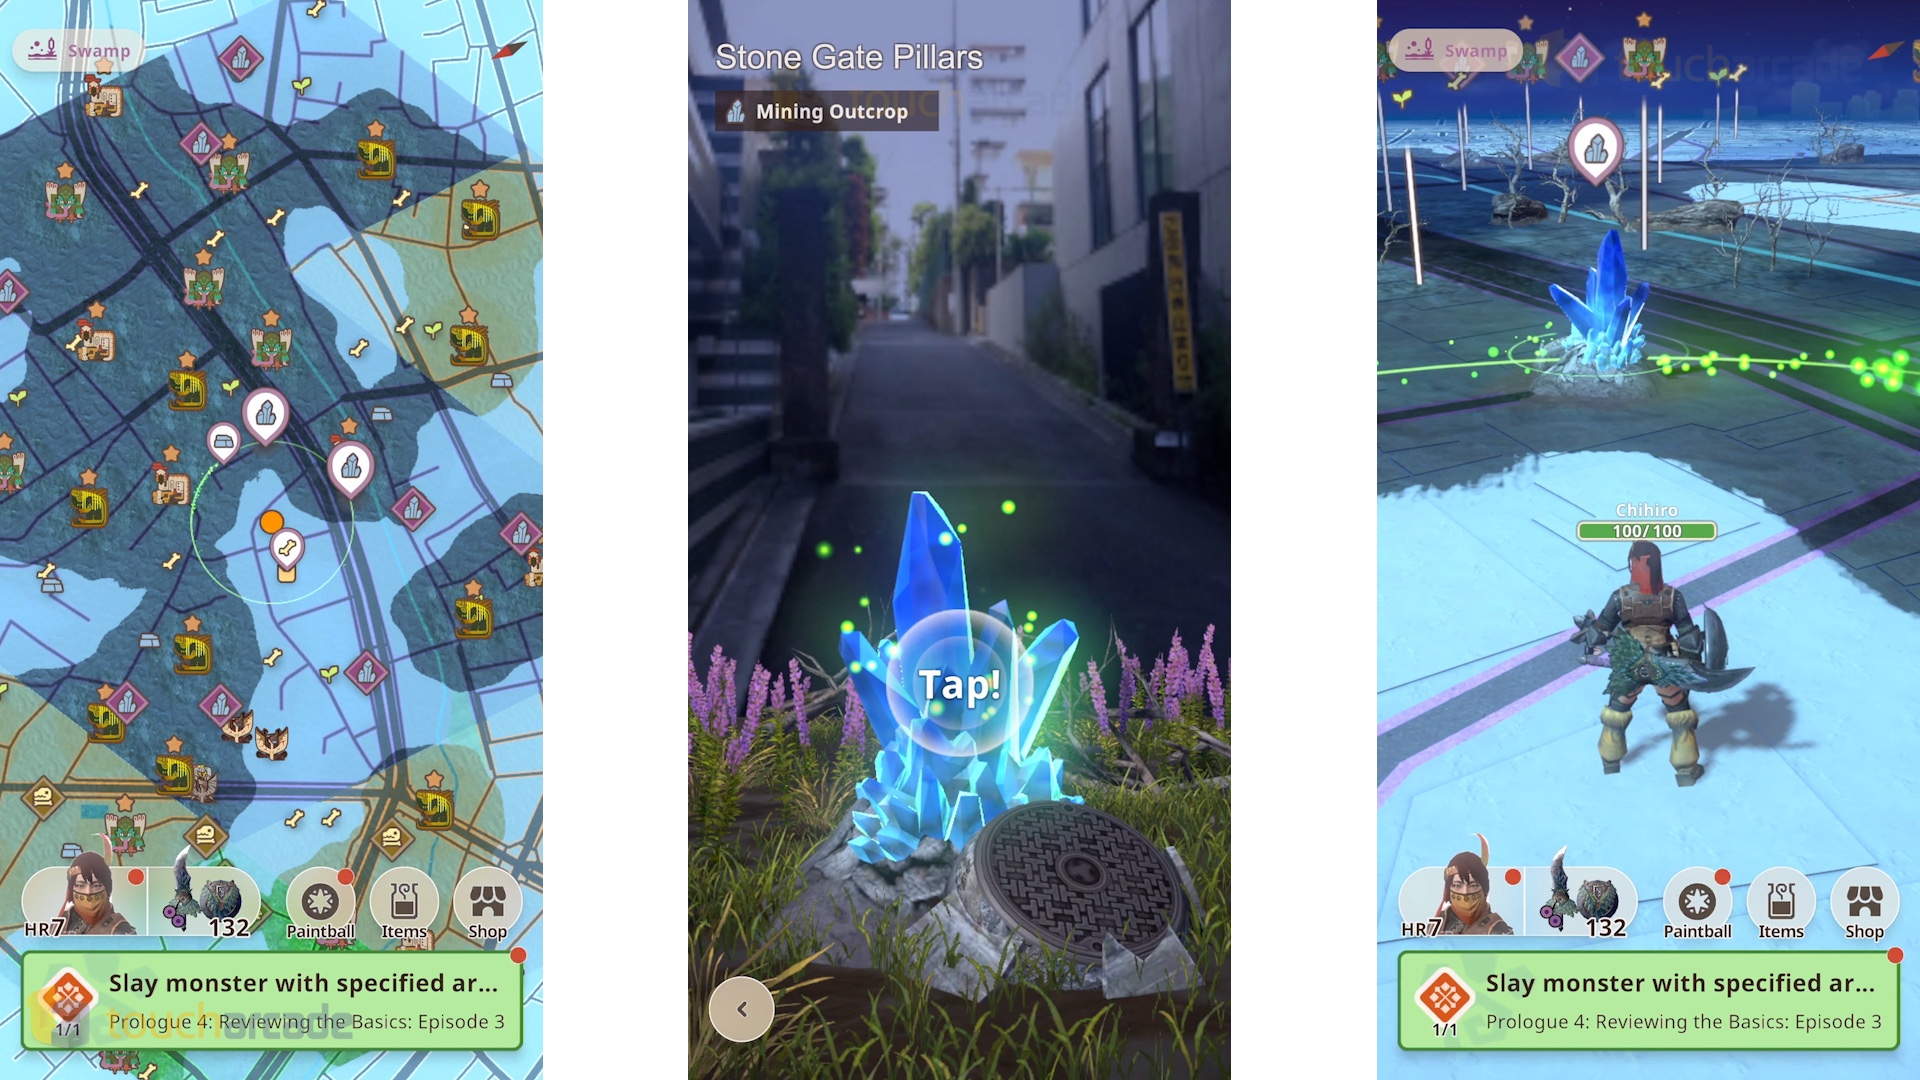 Can 'Monster Hunter Now' Pull Niantic Out of Its Slump?